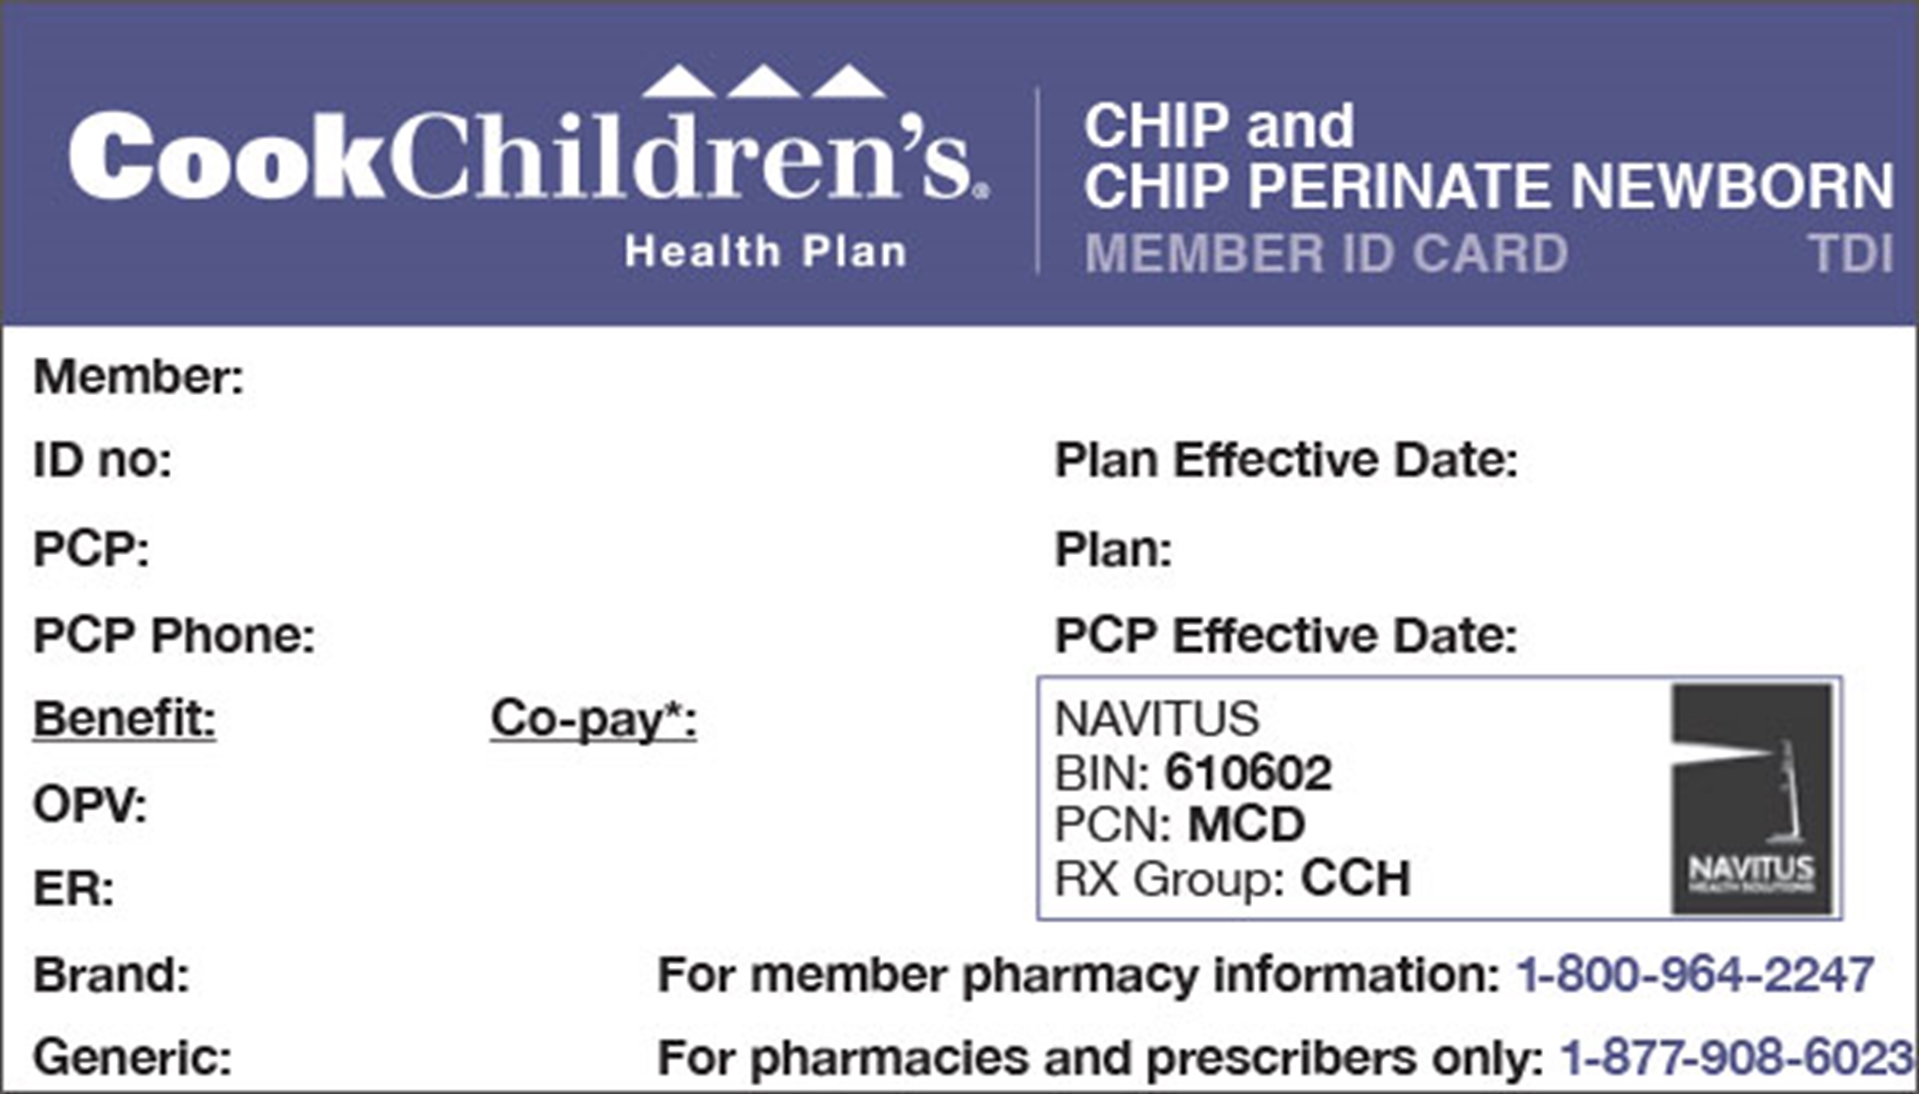 chip-perinate-id-card-how-to-read-main.jpg